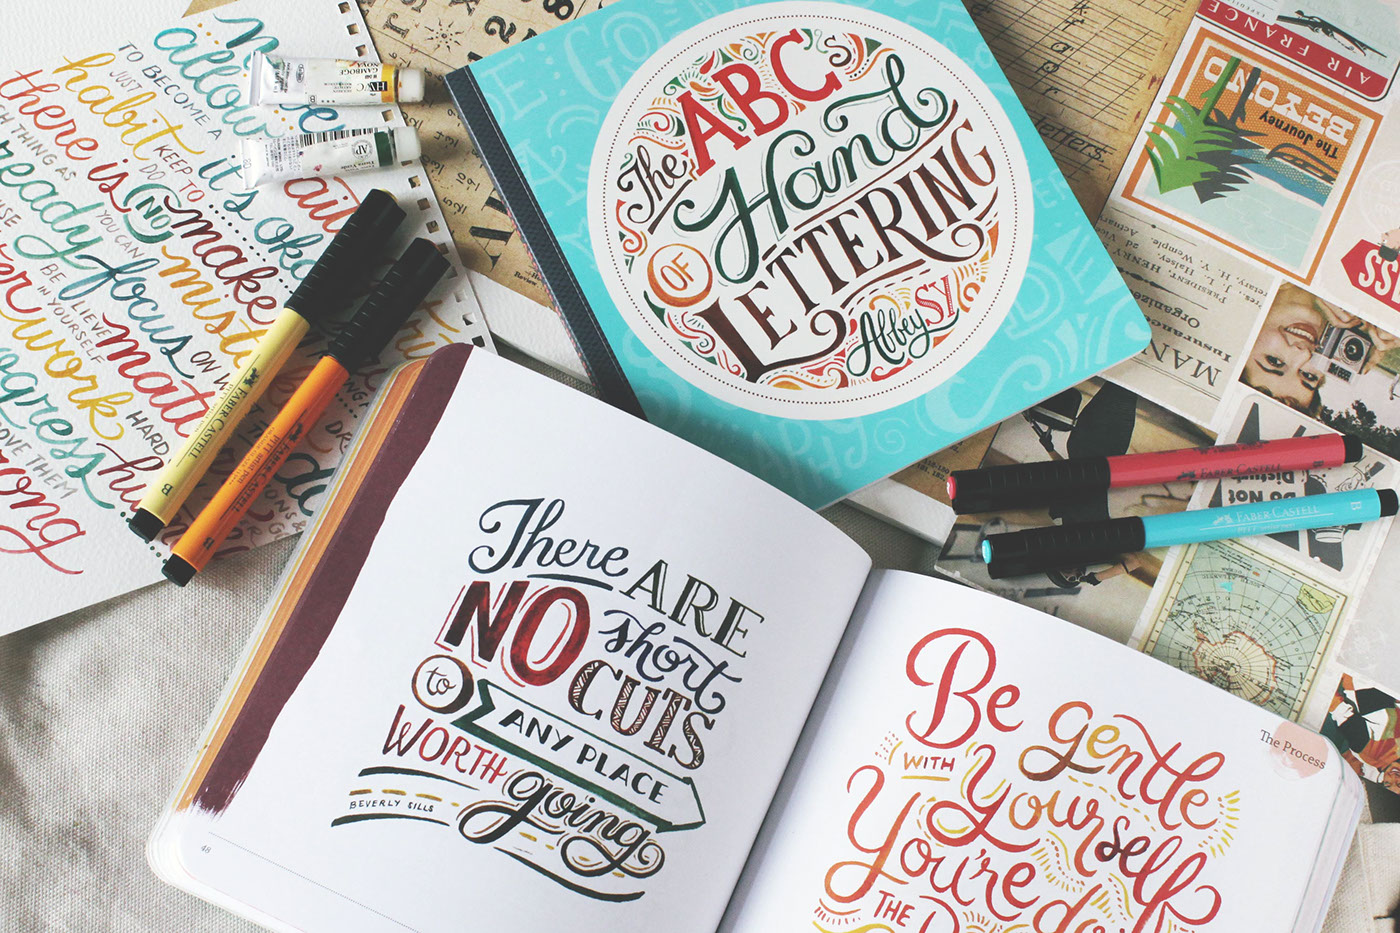 lettering ABCs HAND LETTERING book Summit Books abbey sy beginners book type hand type alphabets letters Quotes inspiration Author